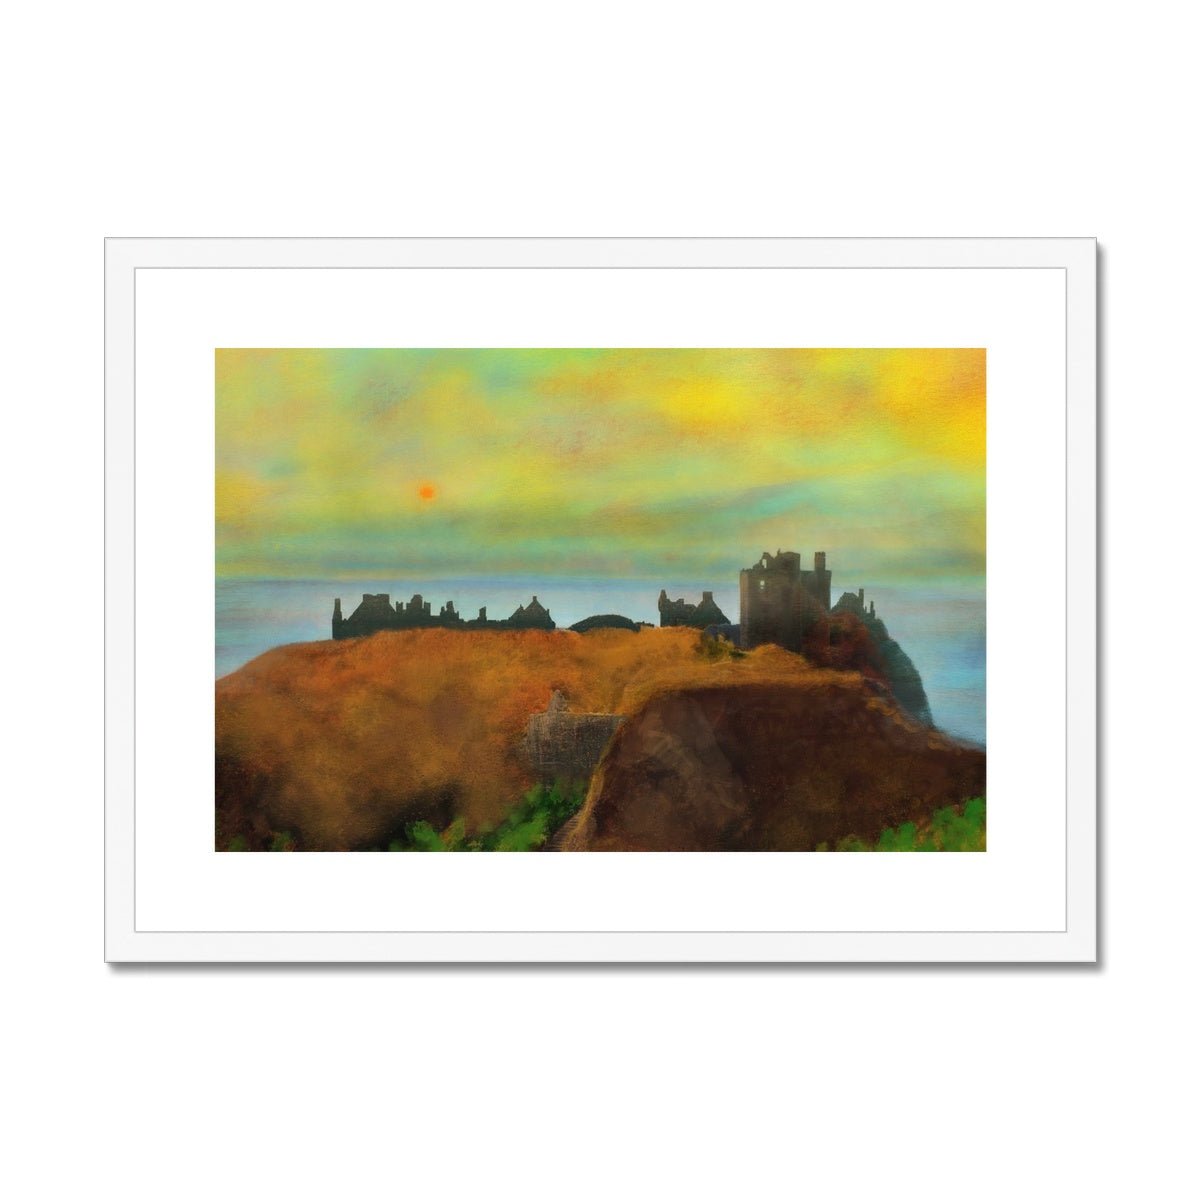 Dunnottar Castle Dusk Dusk Painting | Framed & Mounted Prints From Scotland-Framed & Mounted Prints-Historic & Iconic Scotland Art Gallery-A2 Landscape-White Frame-Paintings, Prints, Homeware, Art Gifts From Scotland By Scottish Artist Kevin Hunter